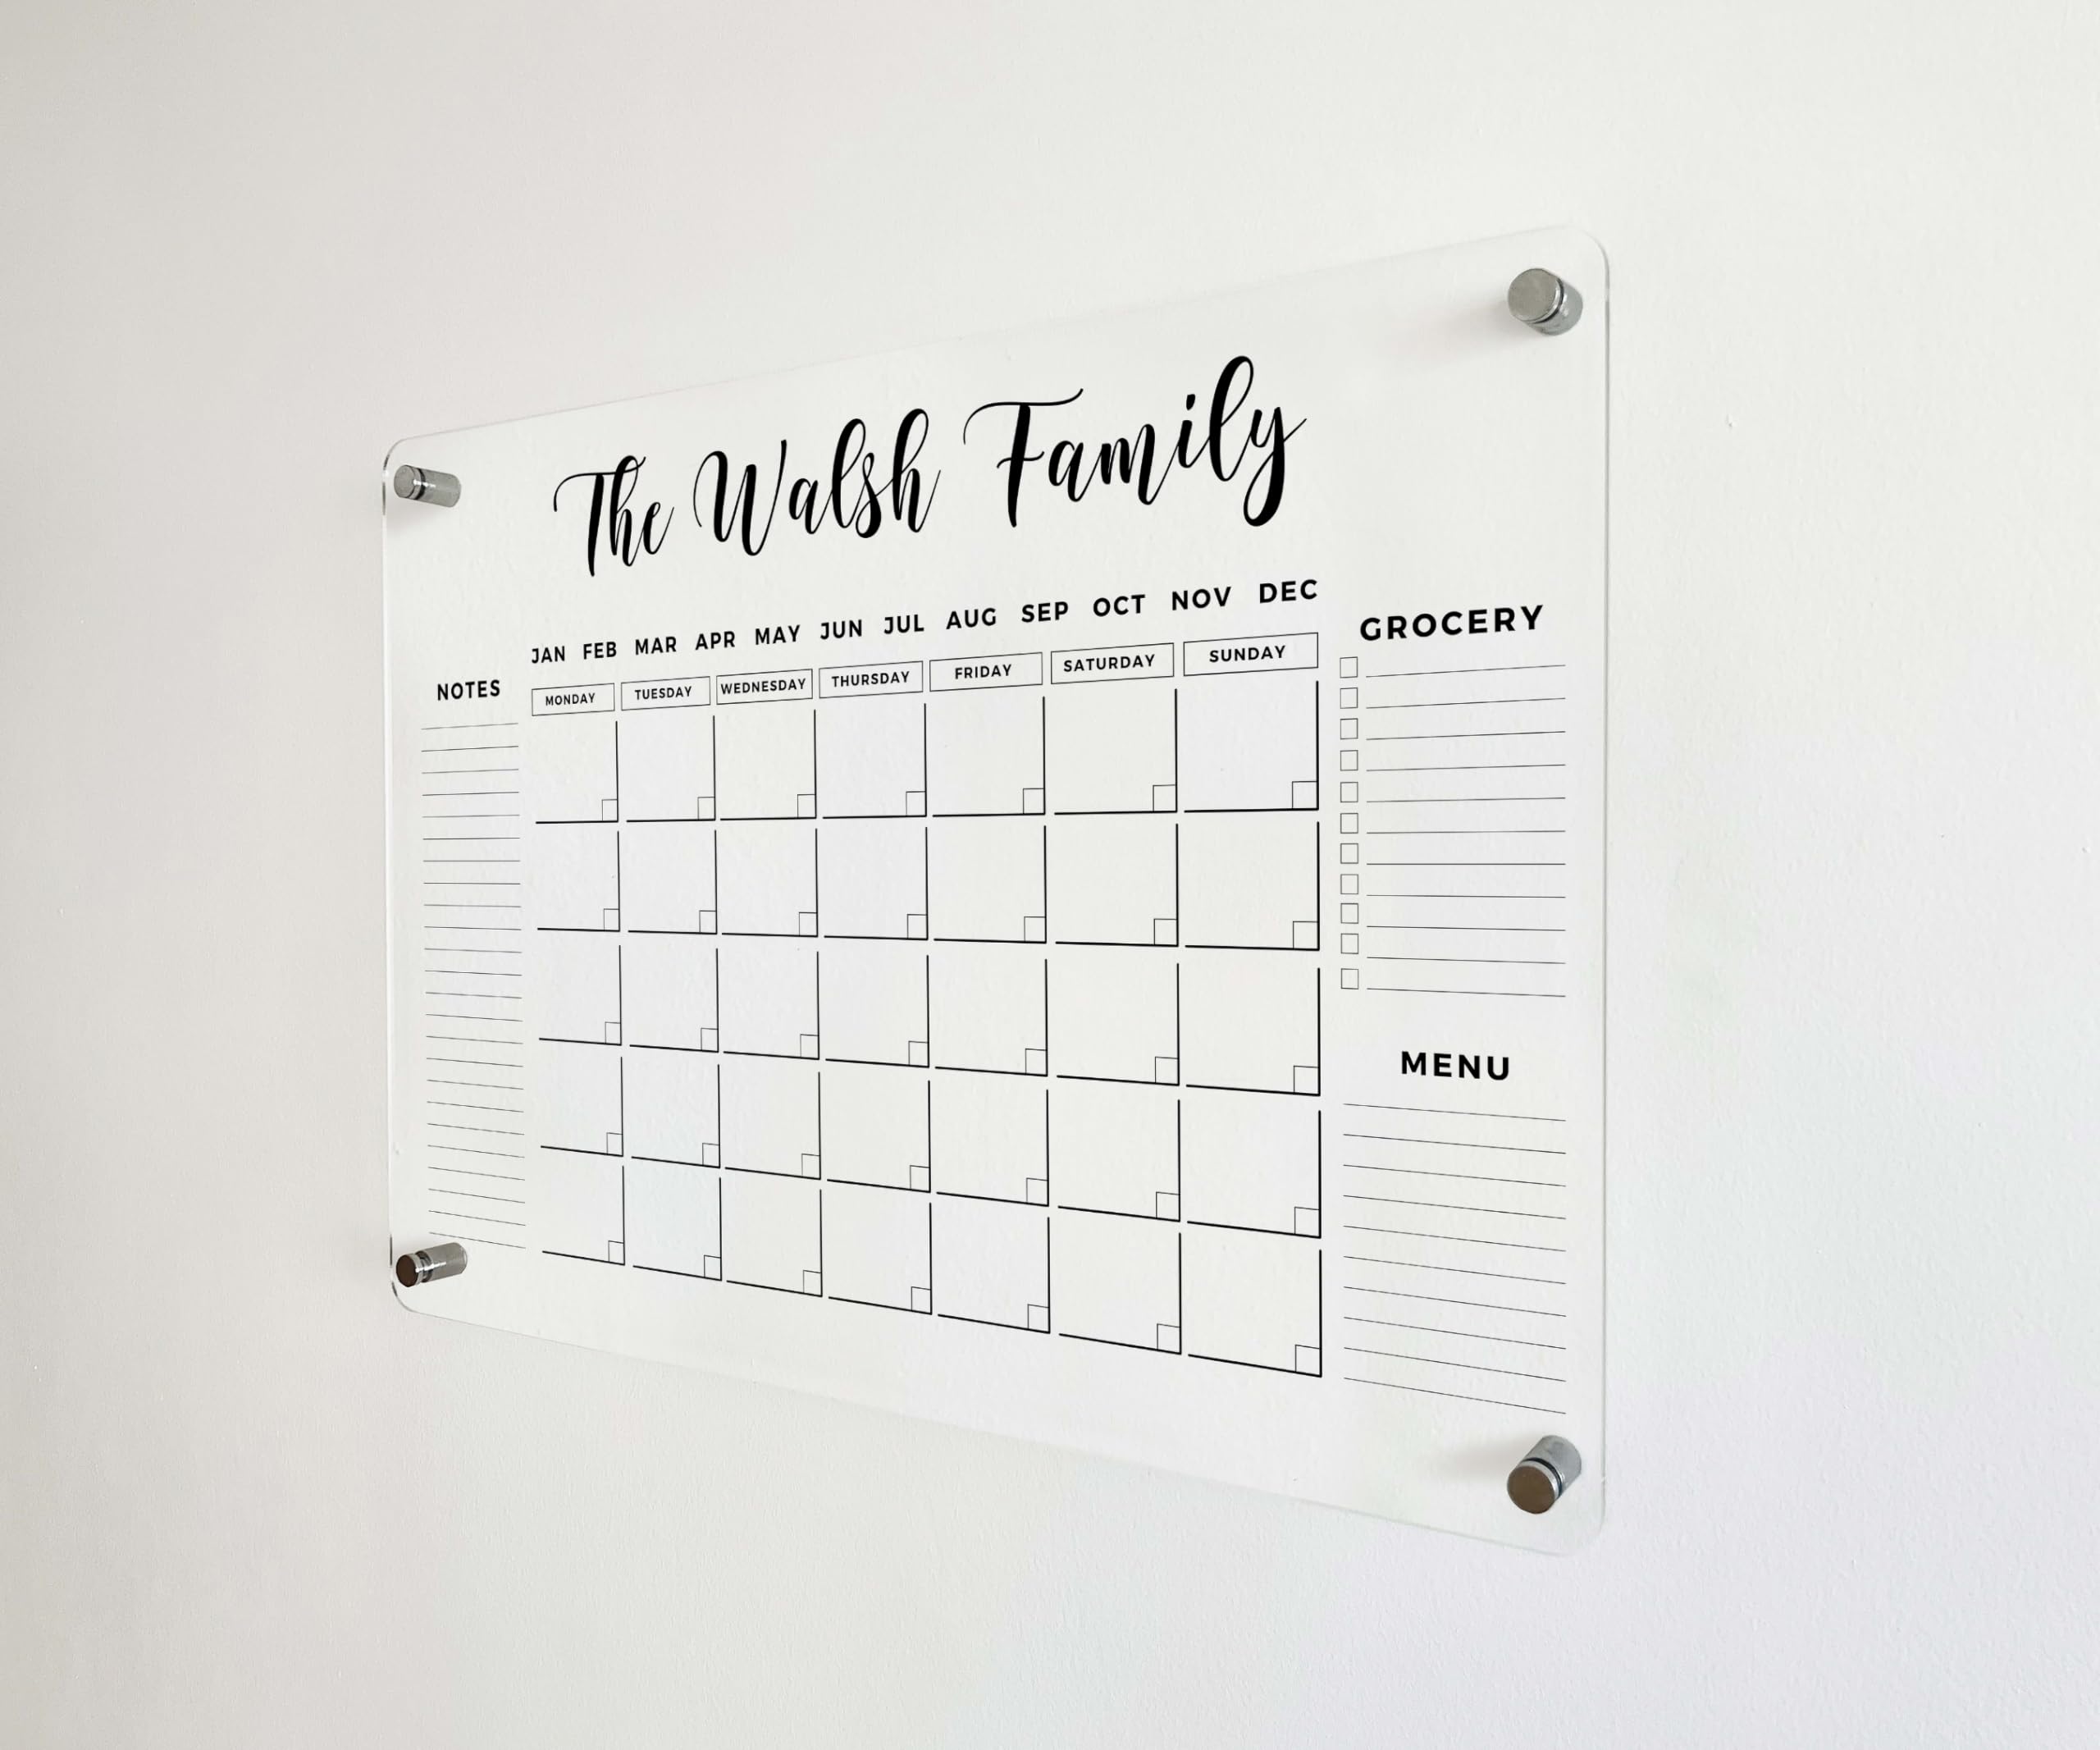 BLACK FAMILY NAME CALENDAR Personalized Calendar 2024 - Personalized Dry Erase Board, Horizontal Wall Calendar, Monthly and Weekly Calendar, Housewarming Gift, Goals, To Do